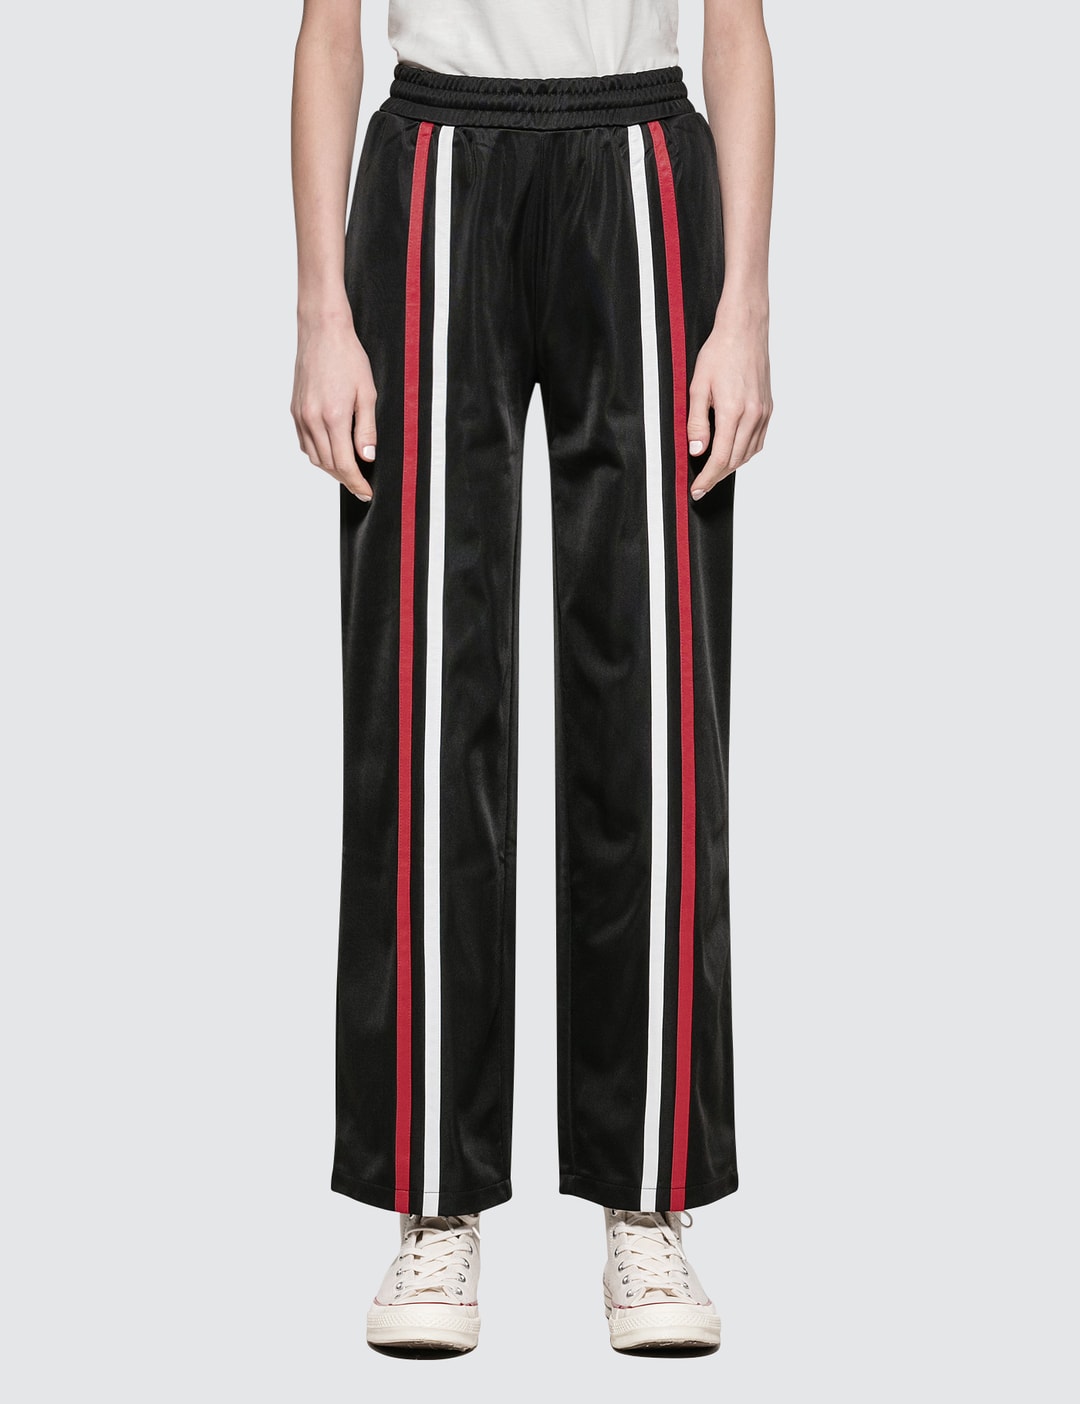 Stüssy - Rory Striped Track Pant | HBX - Globally Curated Fashion and ...